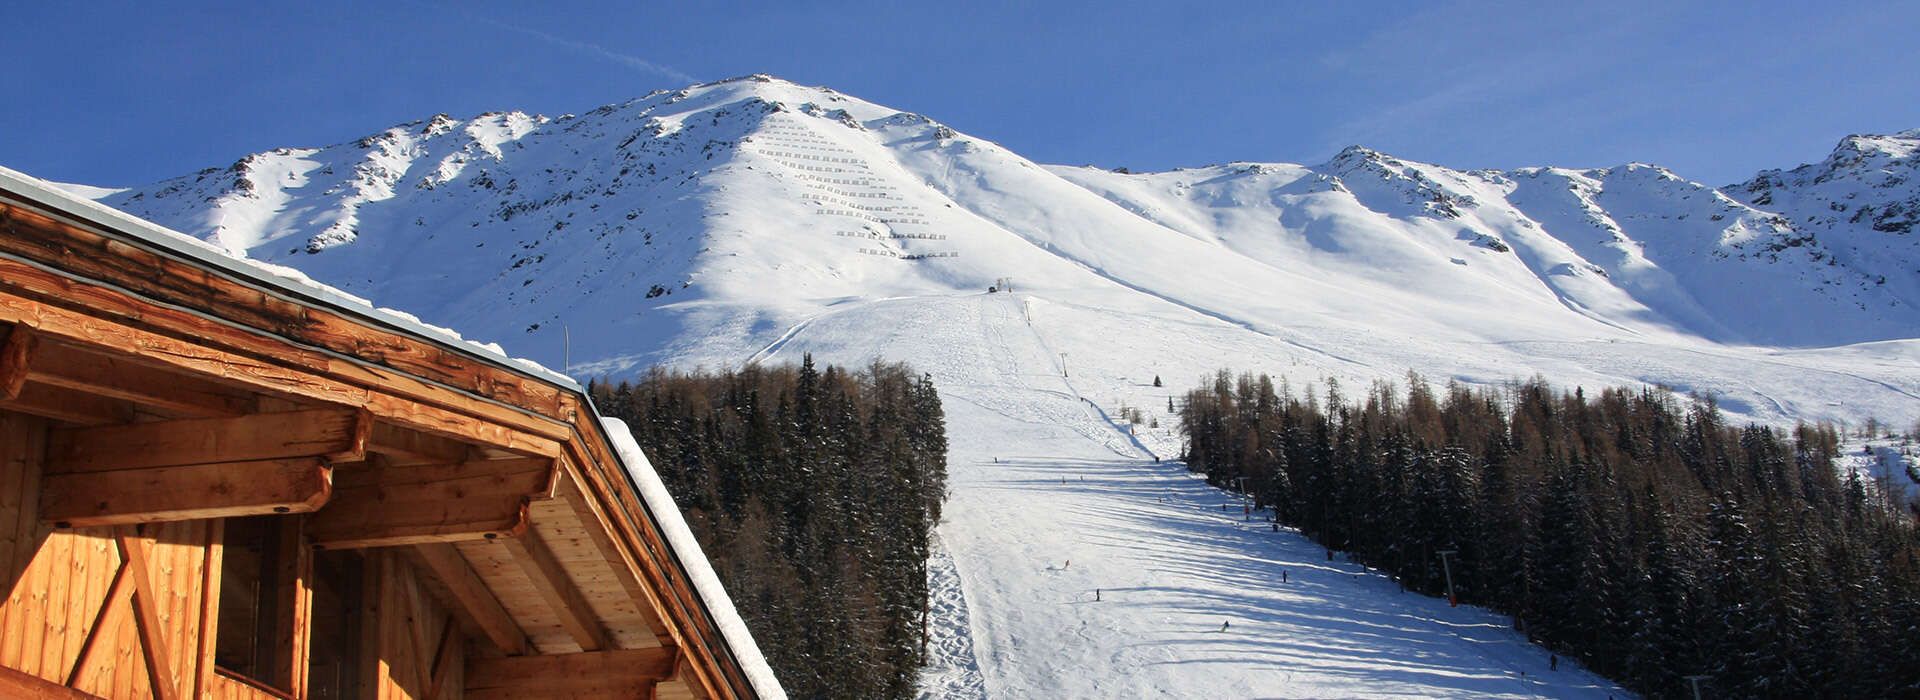 View from the Sattelklause valley station to the mountain and the ski slope